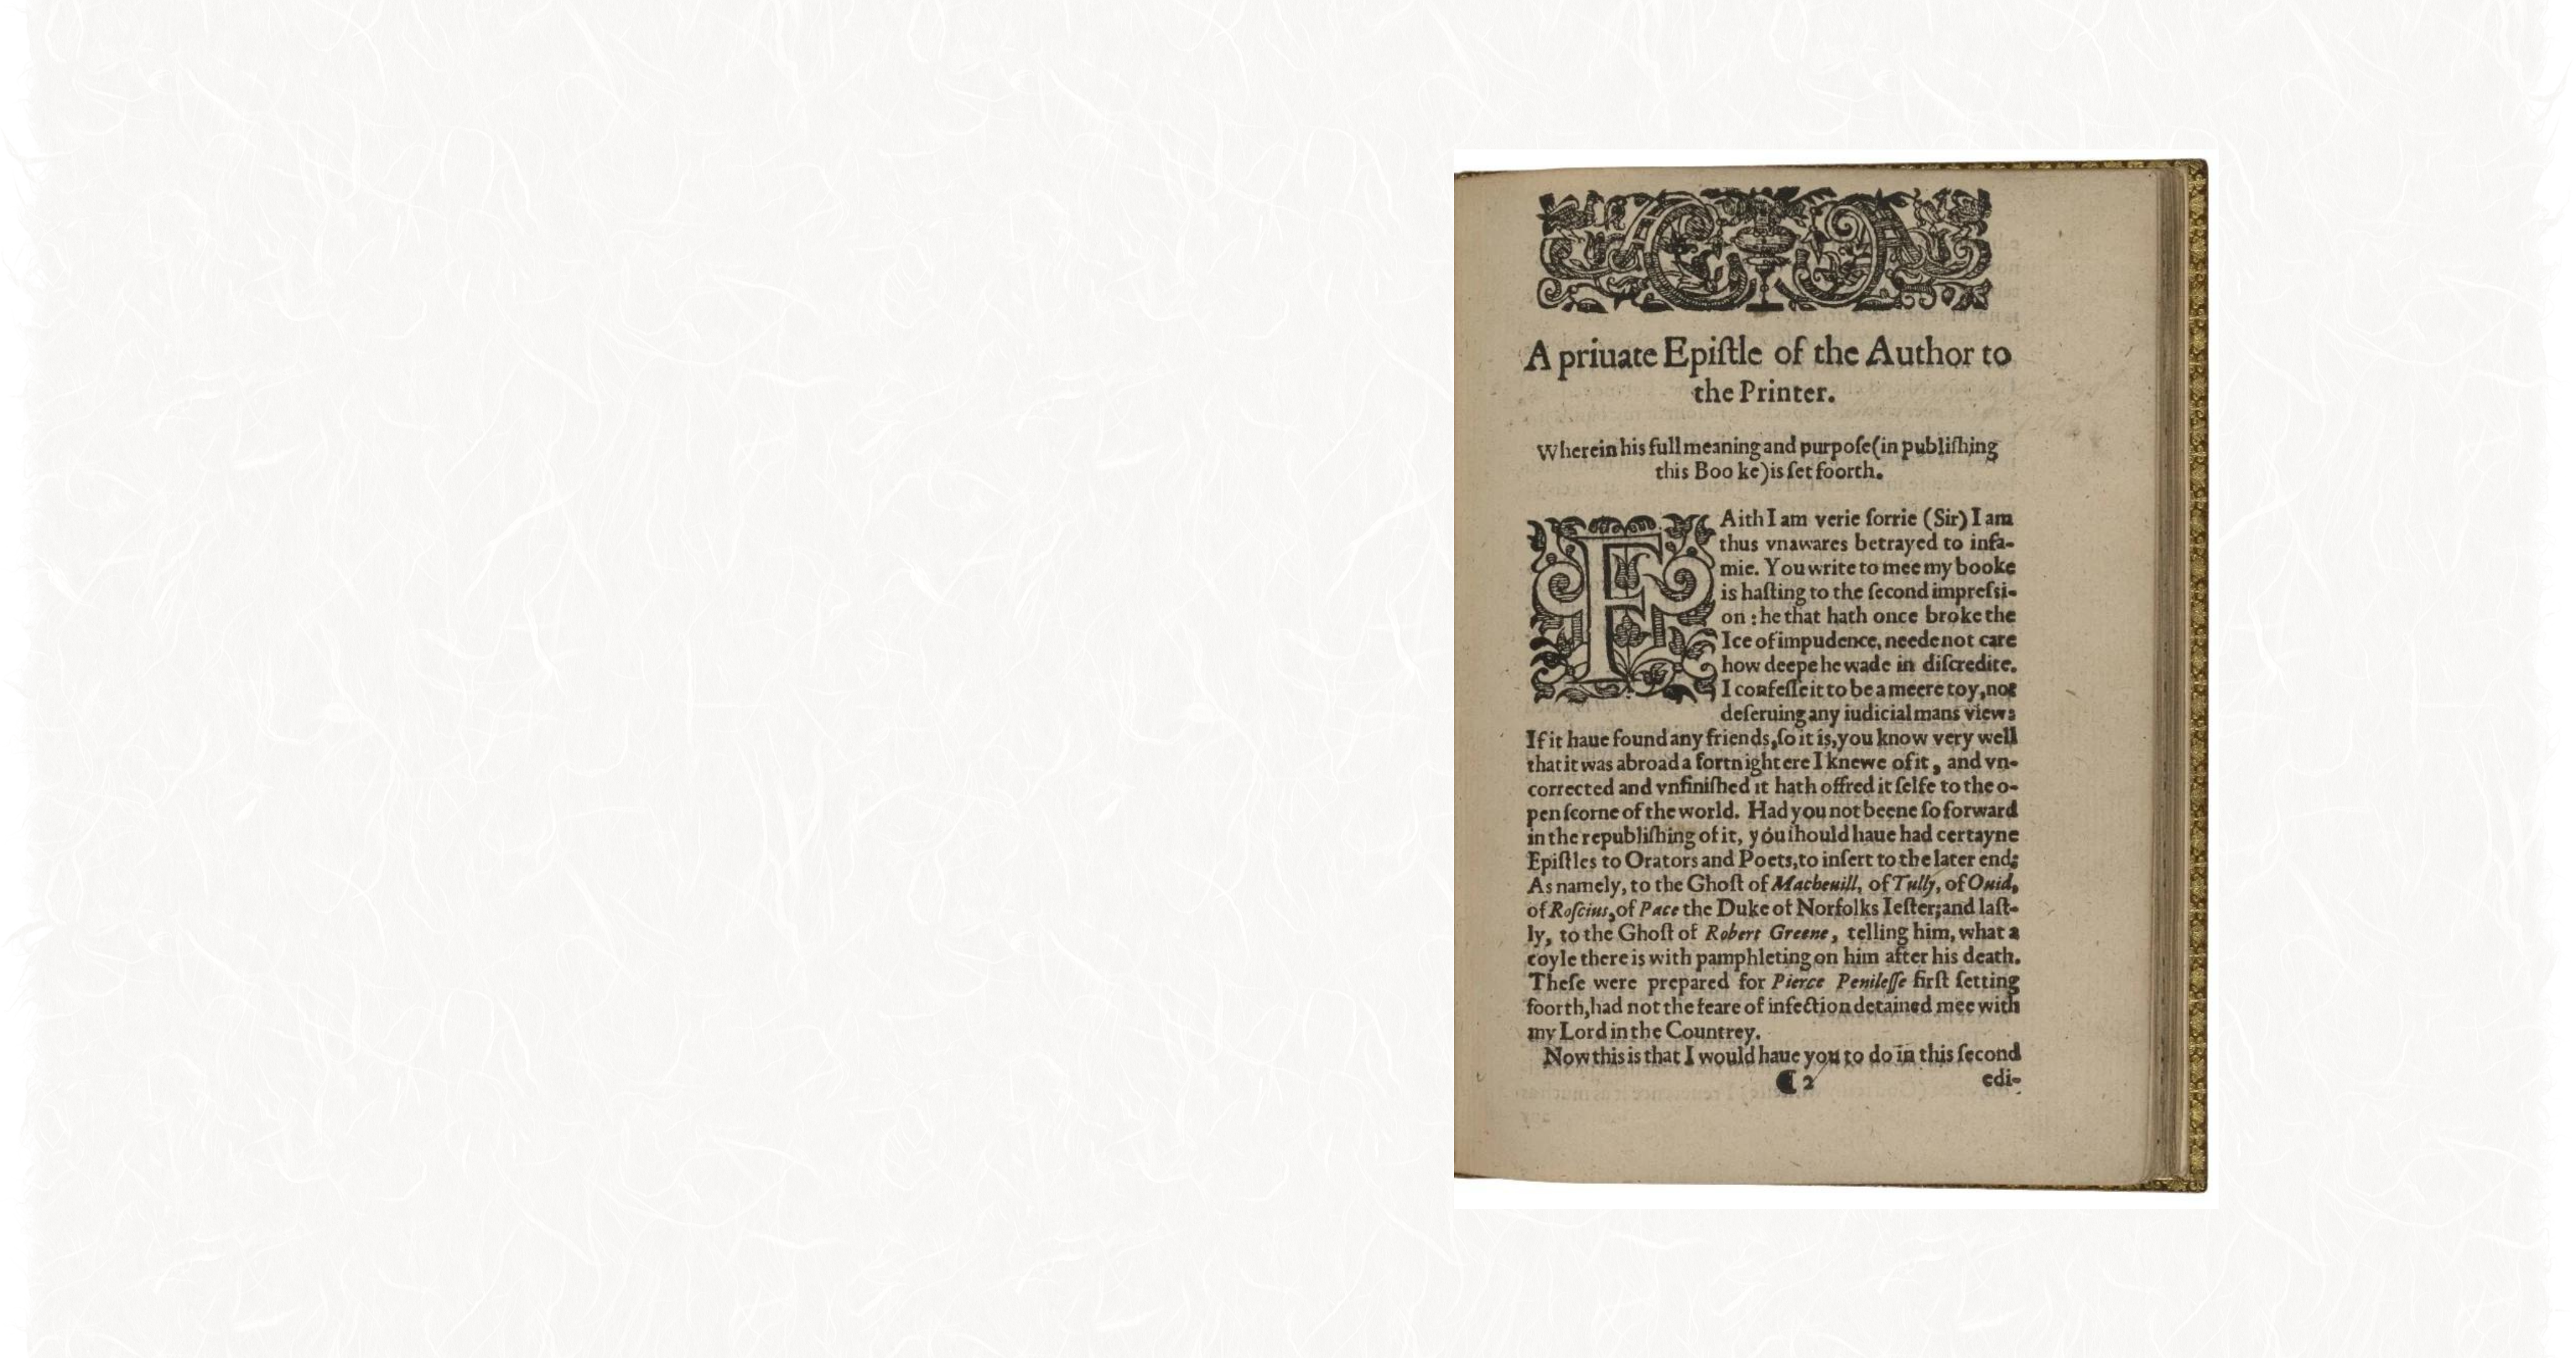 The 2nd edition of 'Pierce PenilesseA digitised scan of a letter from Nashe complaining that the publisher of the first edition rushed it into print without consulting him. 